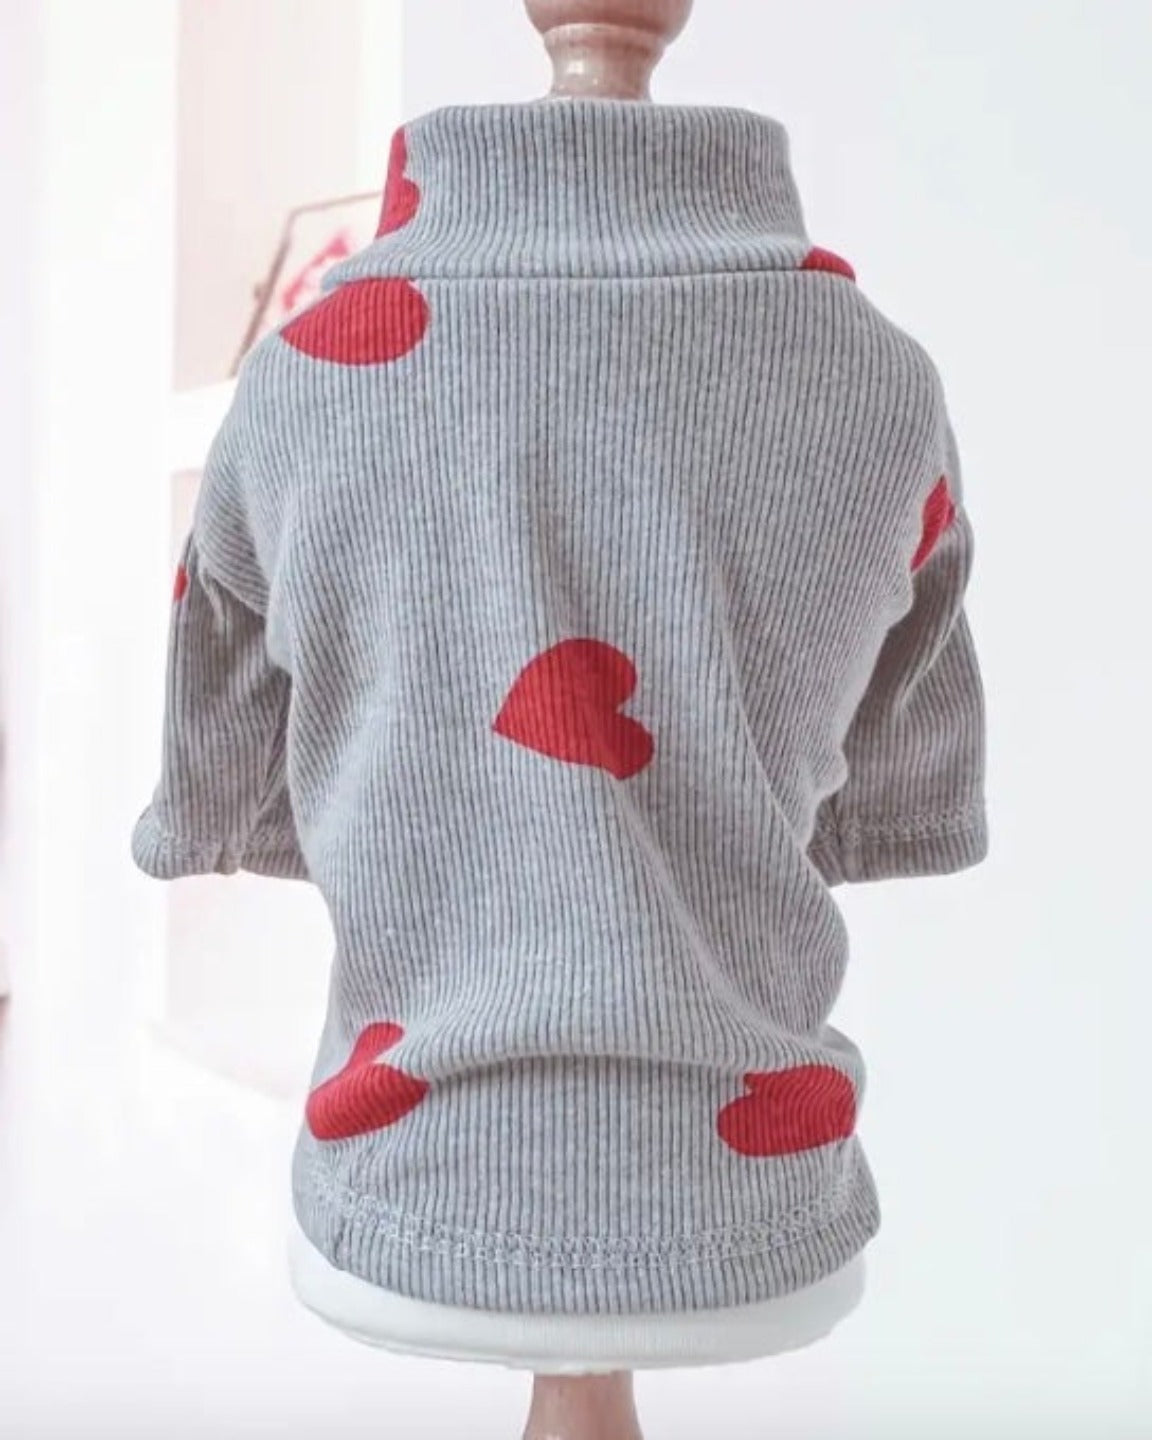 The heart sweater